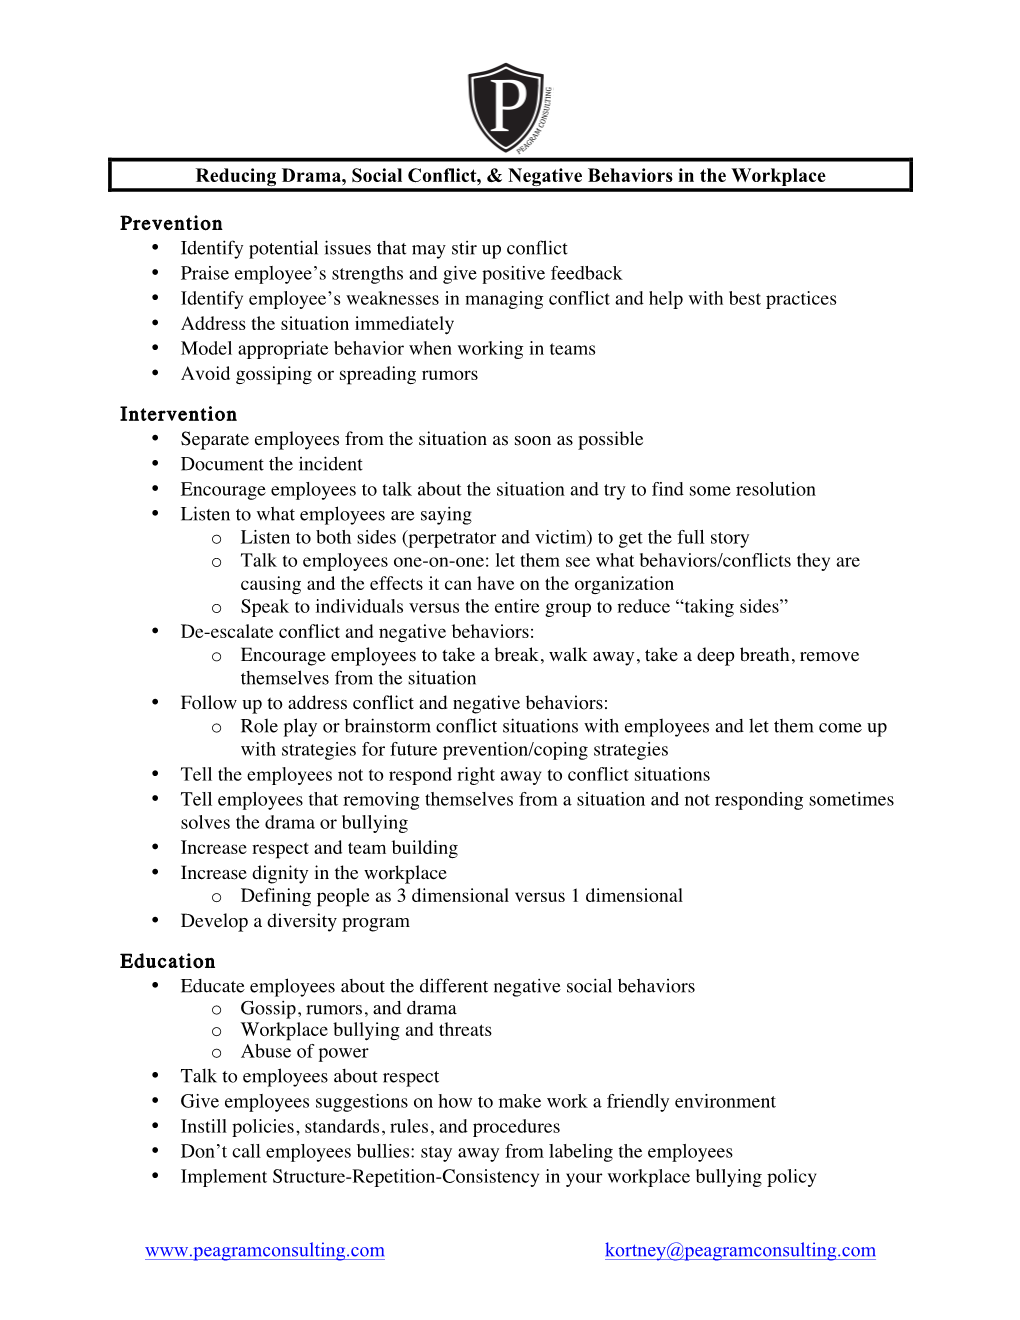 Reducing Drama and Bullying in the Workplace Strategy Sheet